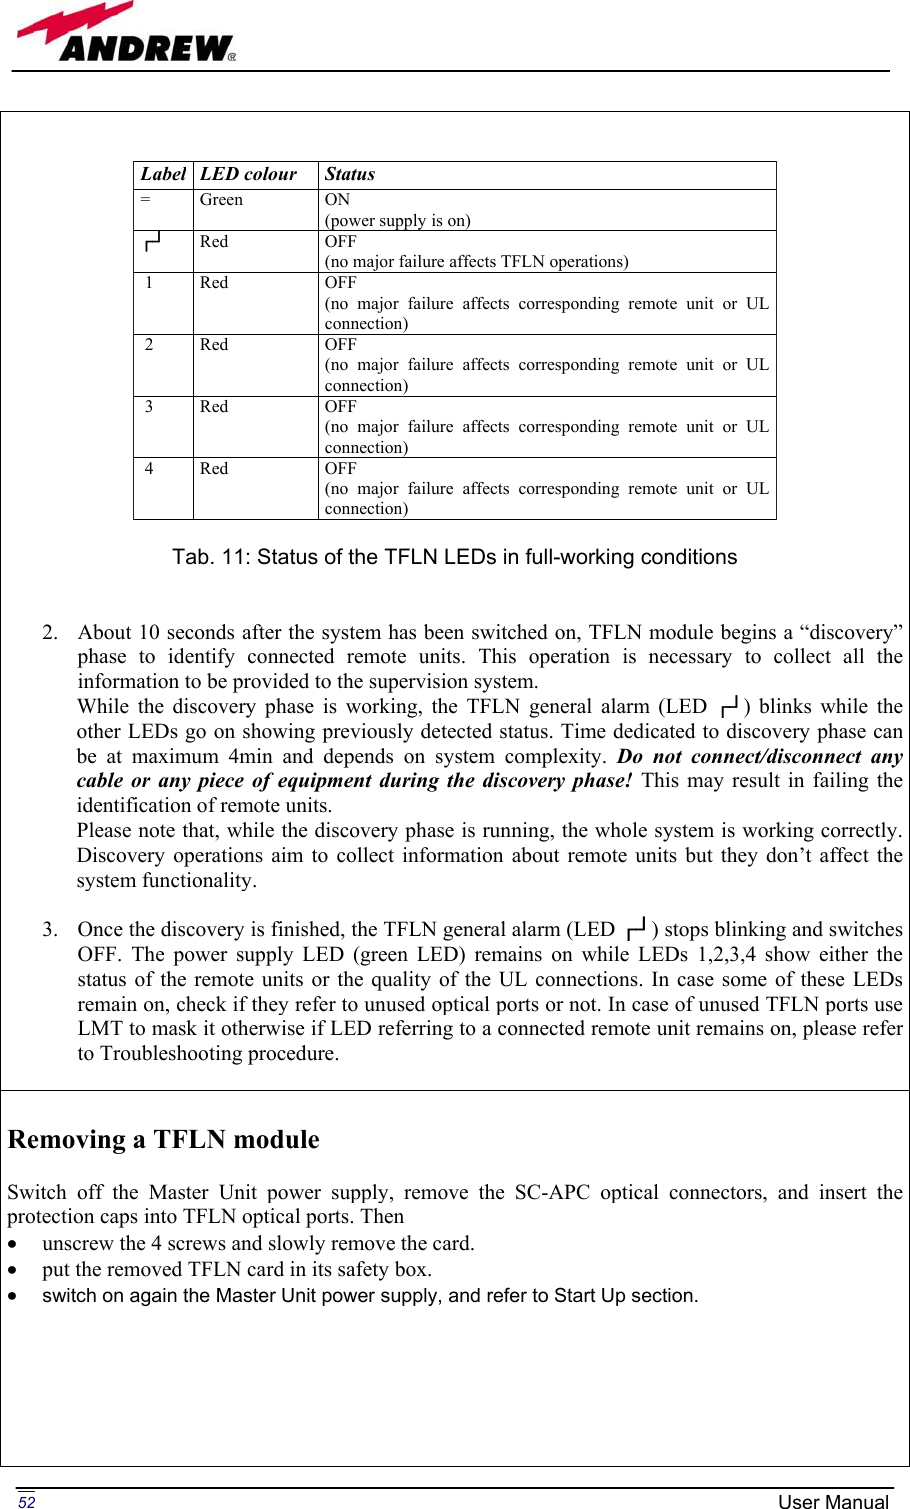 Page 52 of Andrew Wireless Innovations Group BCP-TFAM23 Model TFAM23 Downlink Booster User Manual MN024 04 rev3